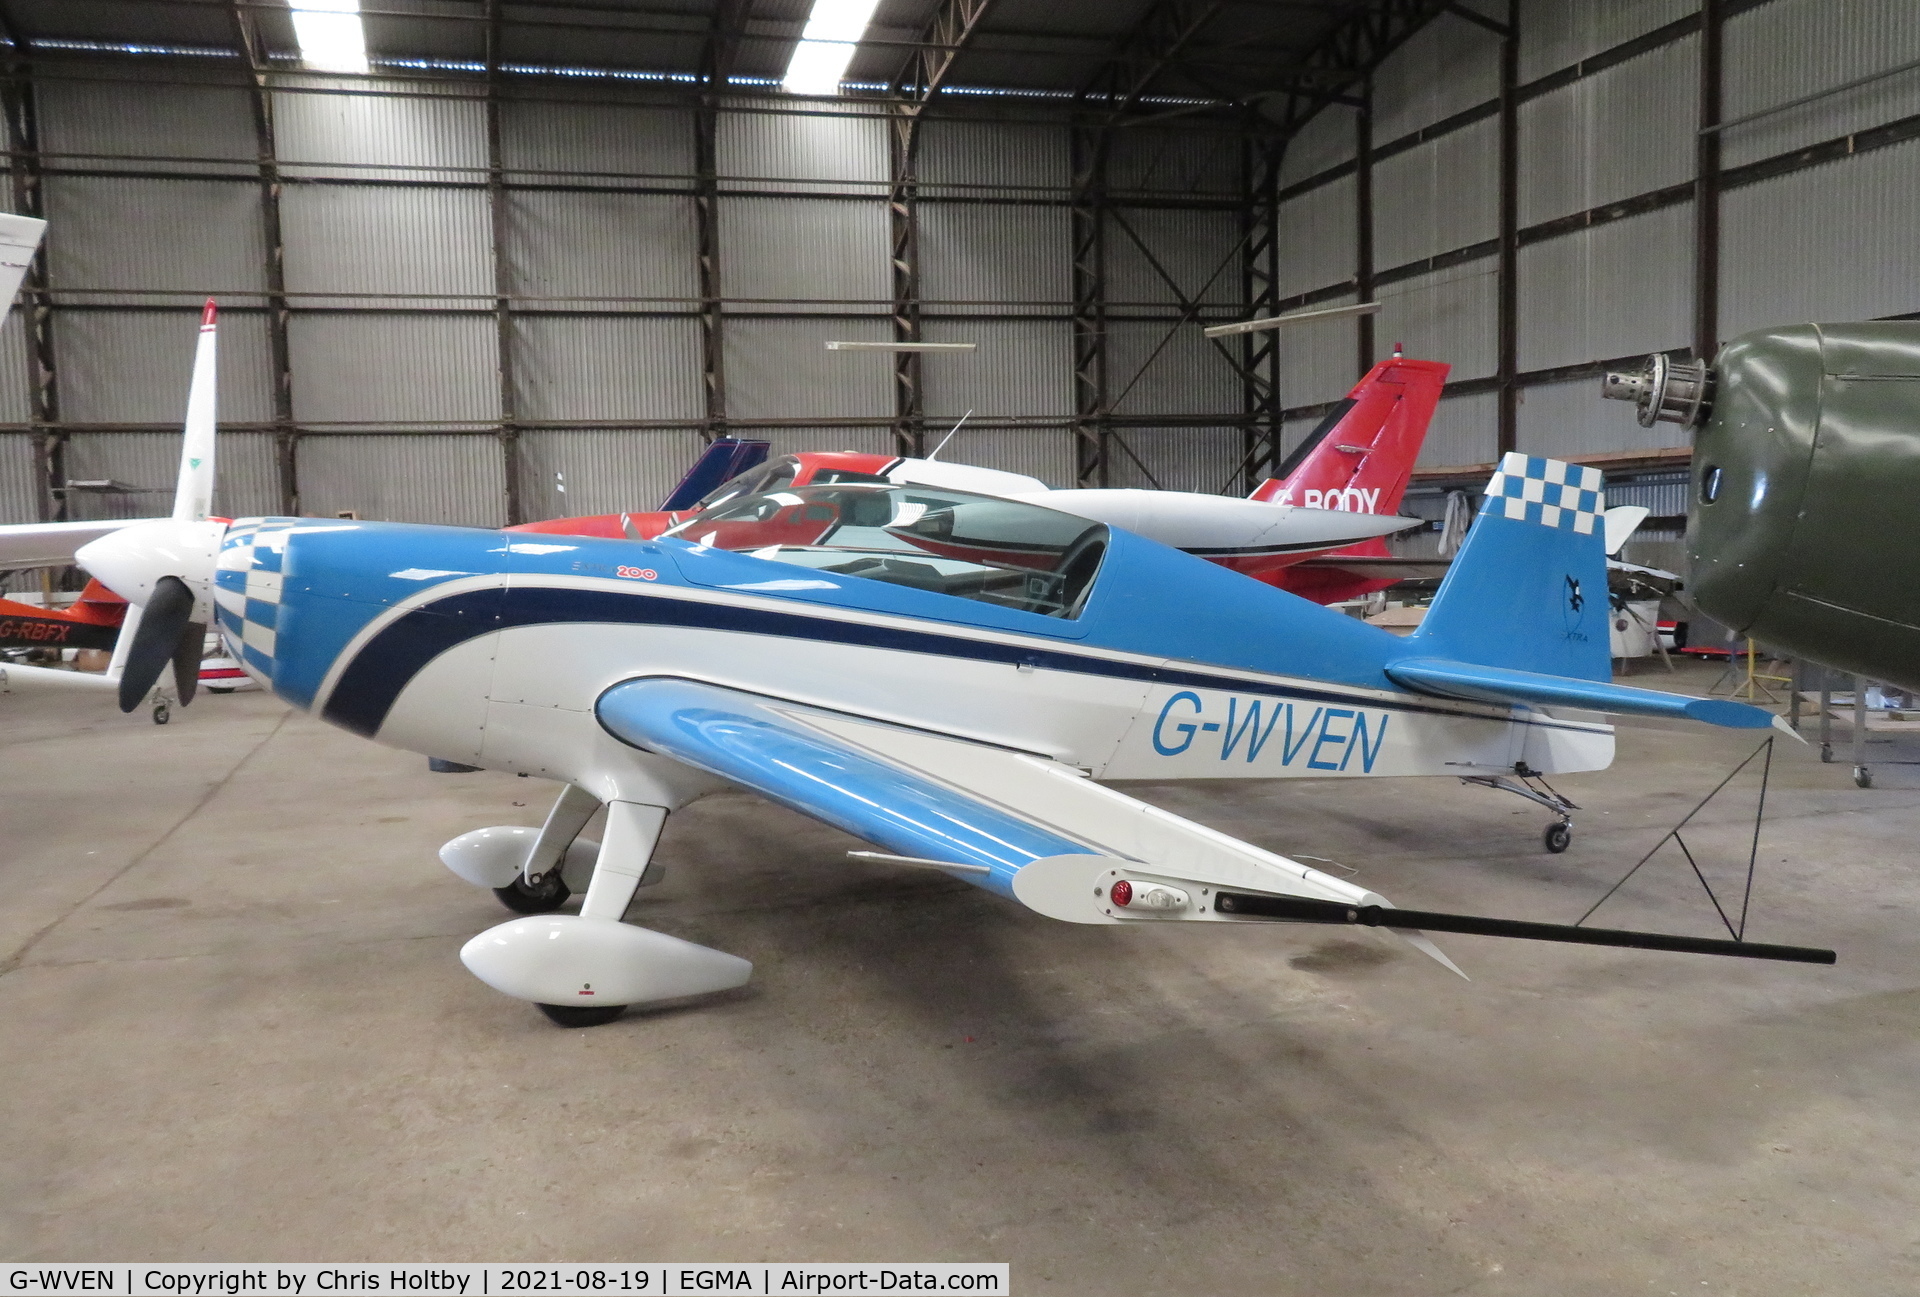 G-WVEN, 2014 Extra EA-300/200 C/N 1046, 2014 Extra safely stored in the hangar at Fowlmere, Cambs.